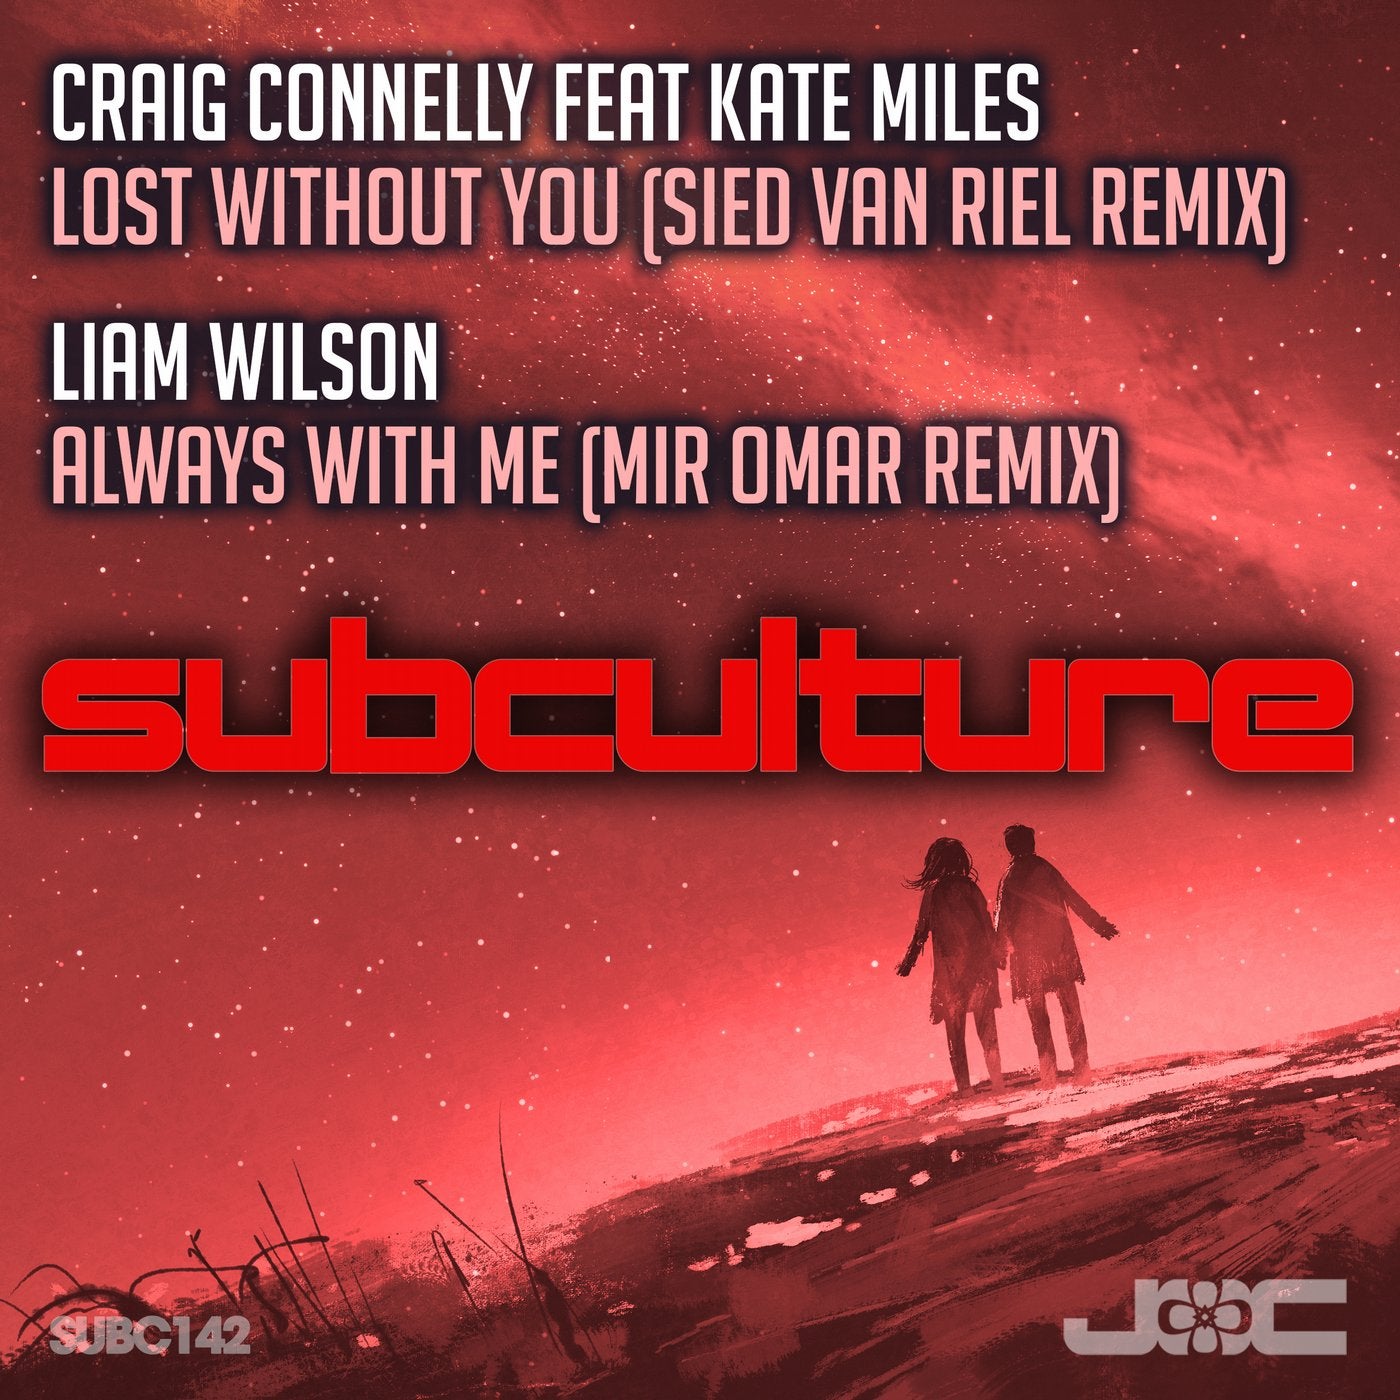 Miles lost. Craig Connelly. Кейт Майлз. Liam Wilson DJ. Craig Connelly featuring Kate Miles — Lost without you(Extended Mix.